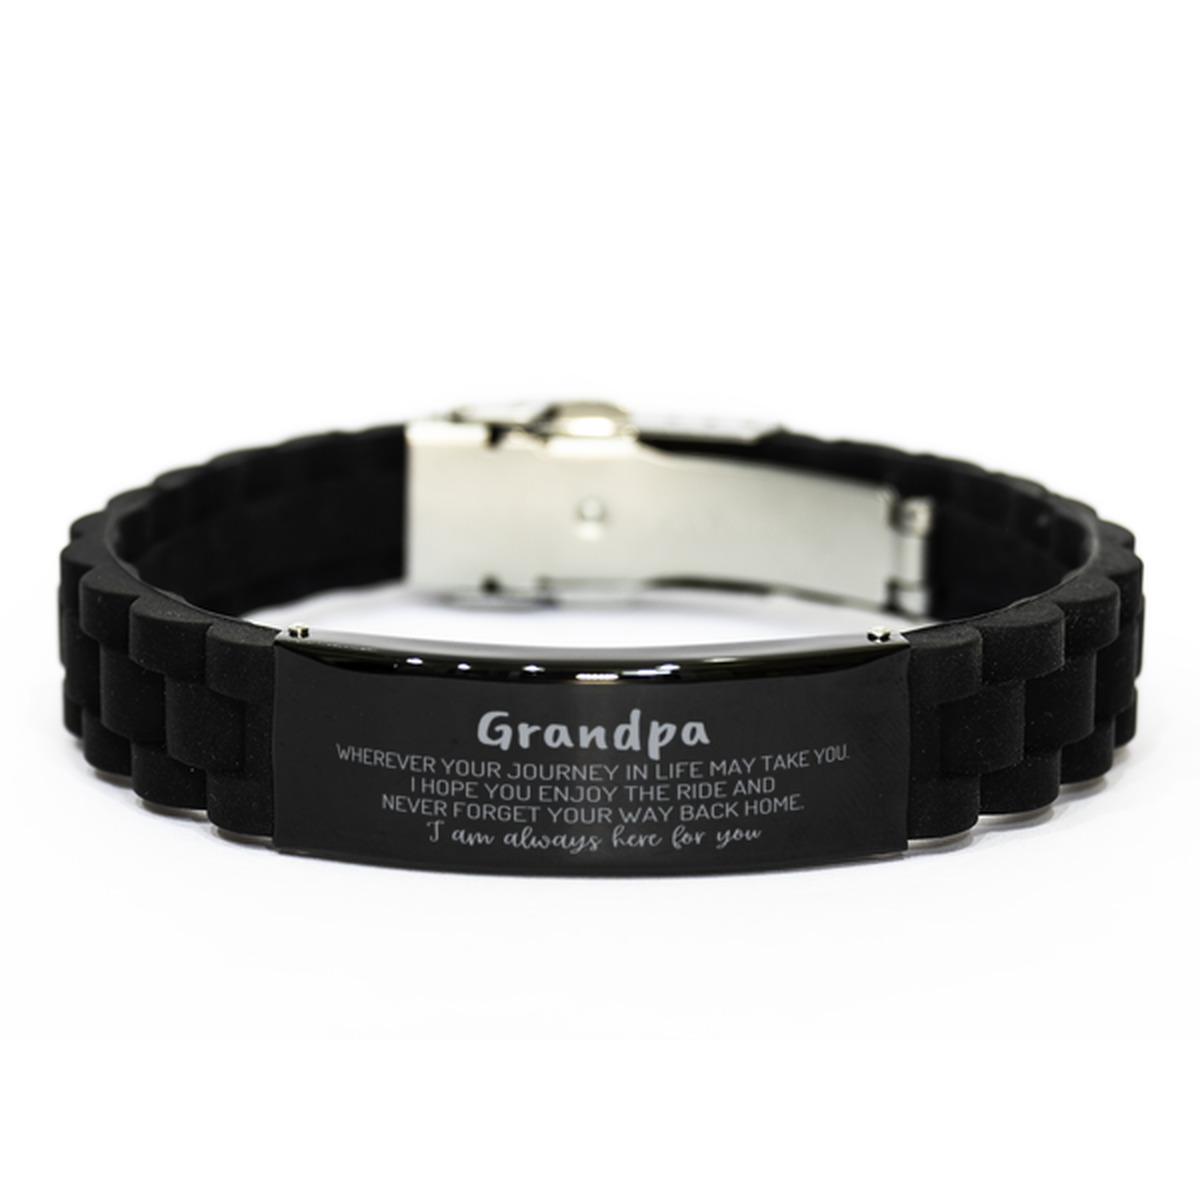 Grandpa wherever your journey in life may take you, I am always here for you Grandpa Black Glidelock Clasp Bracelet, Awesome Christmas Gifts For Grandpa, Grandpa Birthday Gifts for Men Women Family Loved One